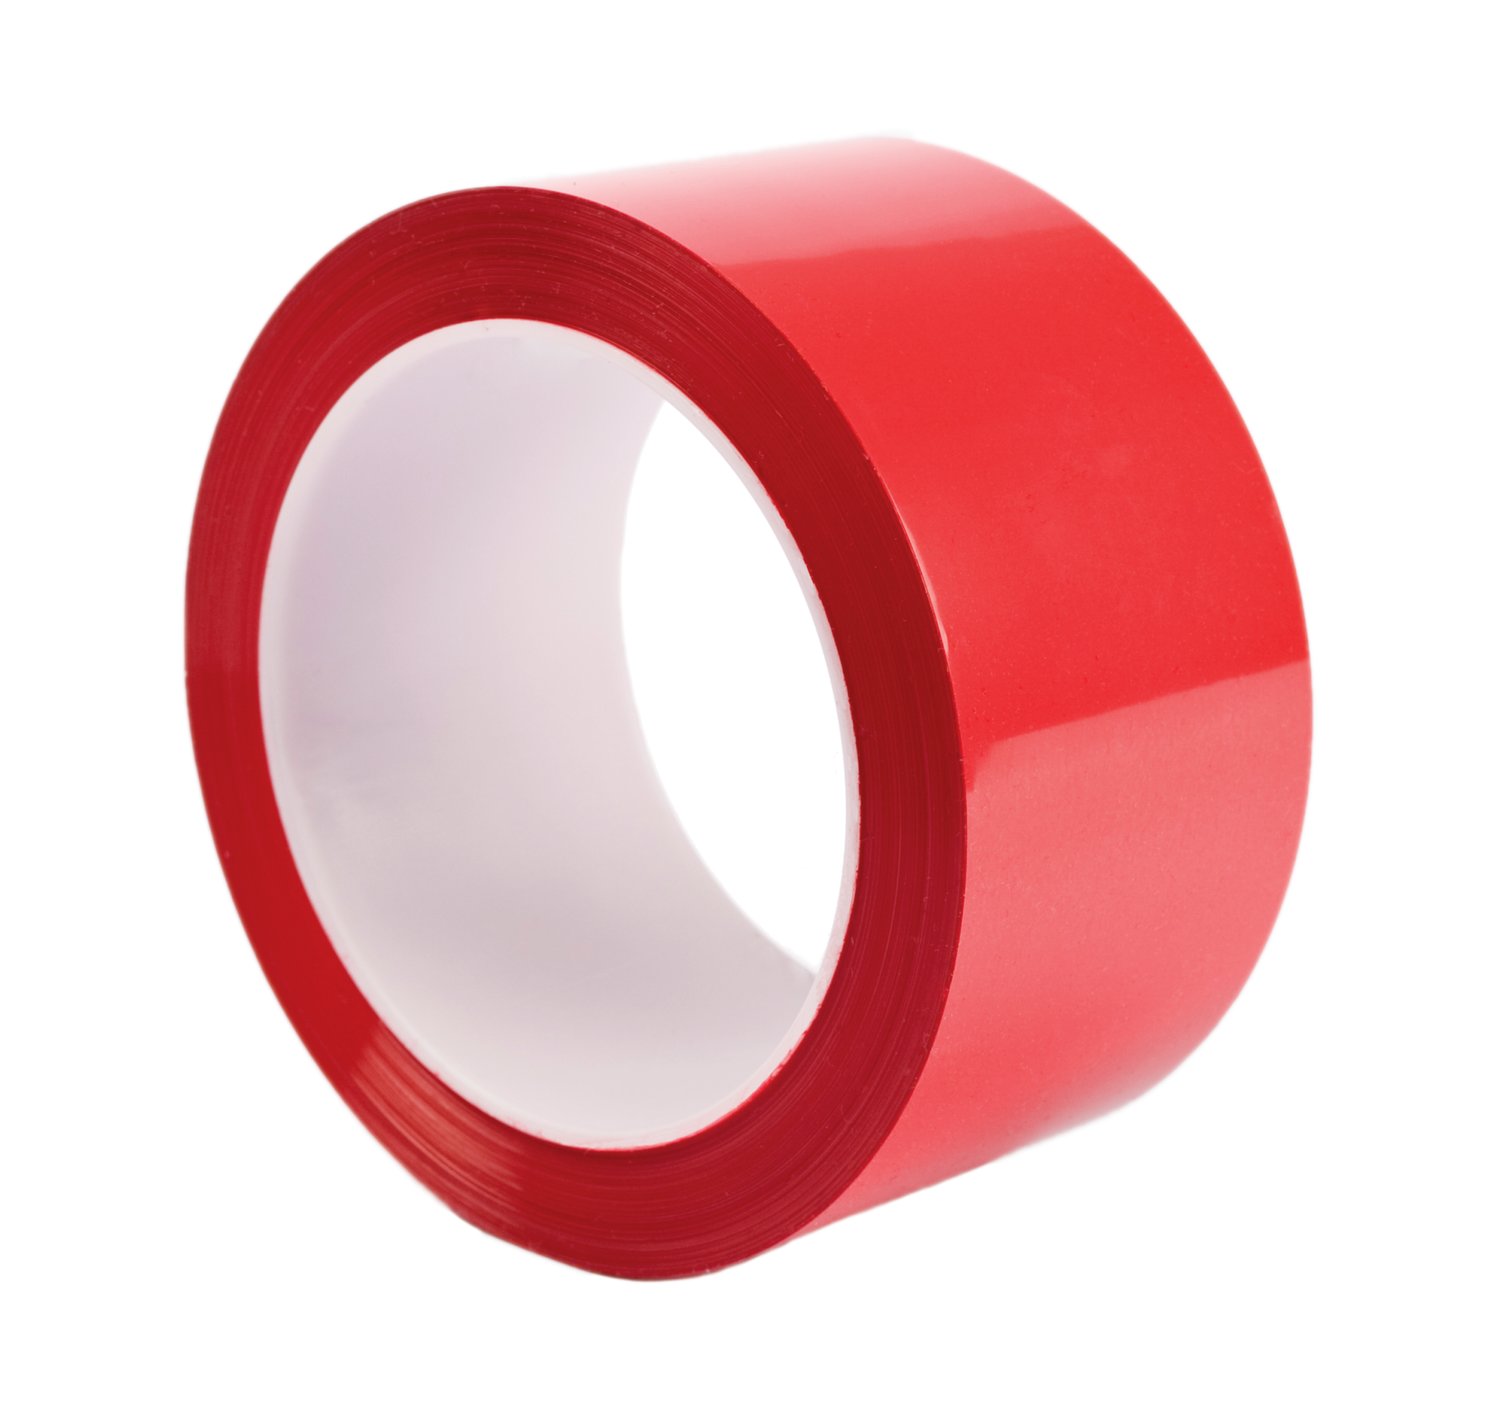 7010048678 - 3M Polyester Film Tape 850, Red, 18 in x 72 yd, 1.9 mil, 1 rolls per case